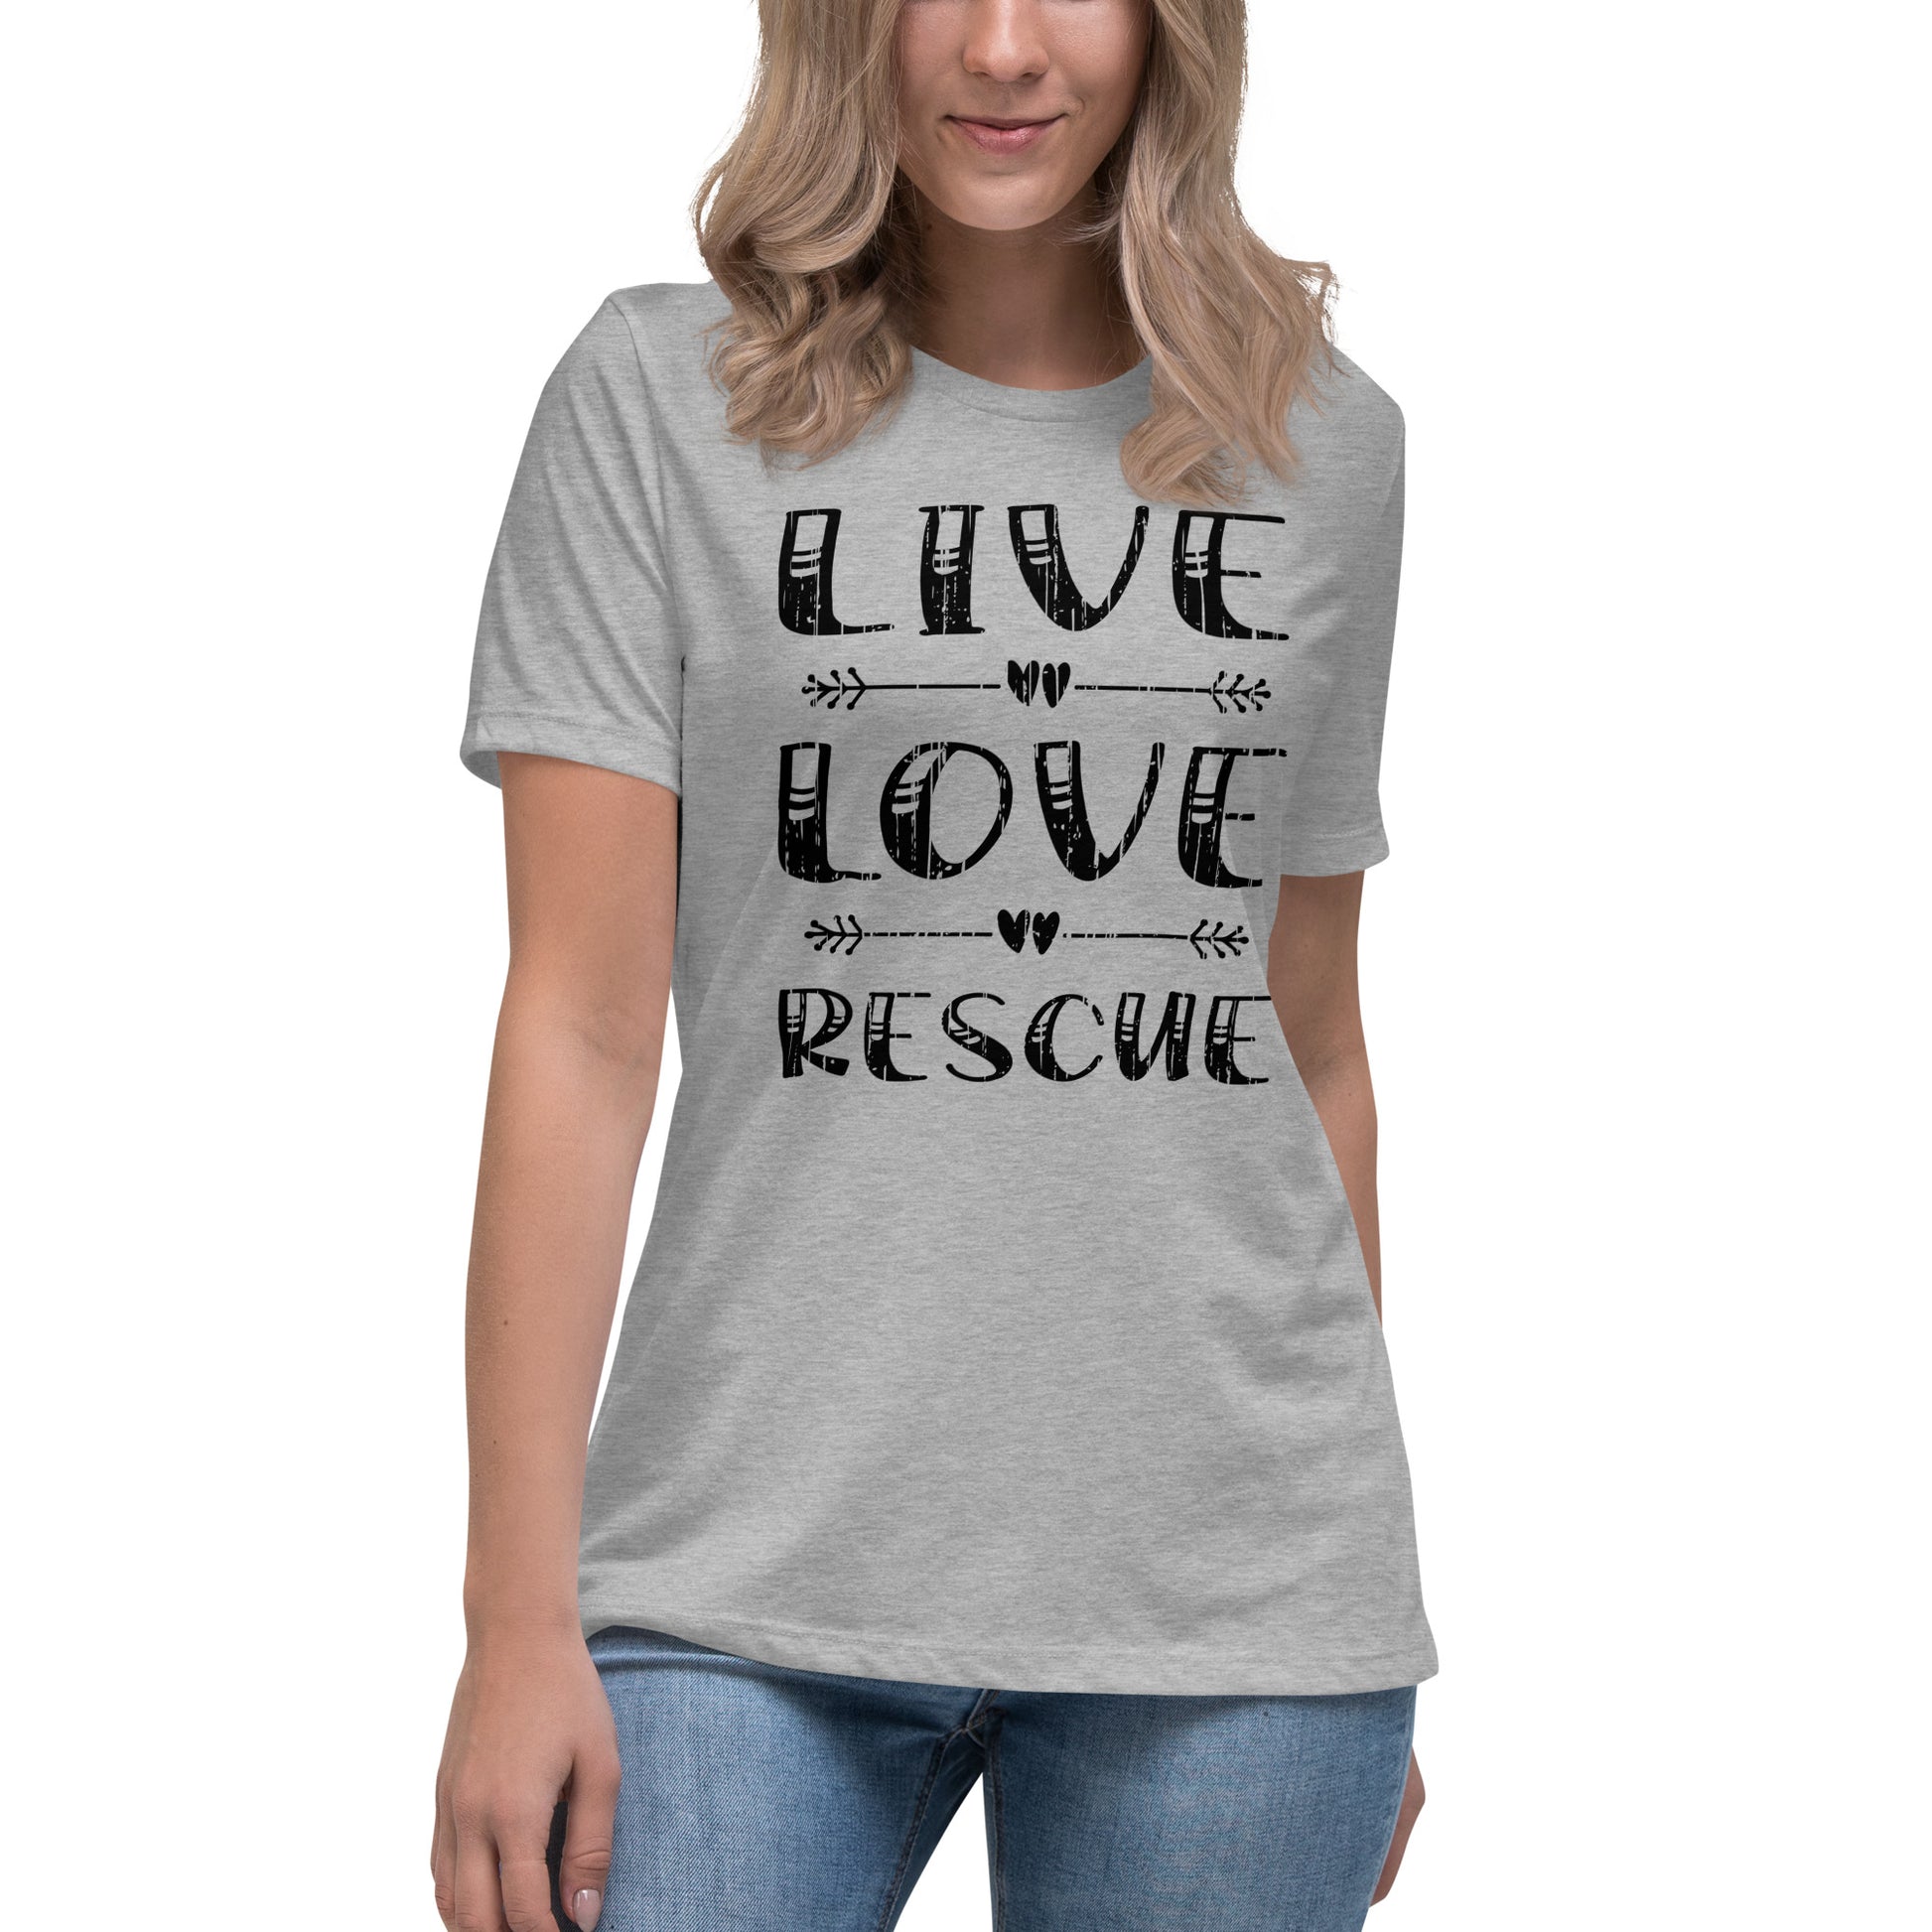 Live love rescue women’s relaxed fit t-shirts by Dog Artistry athletic heather color